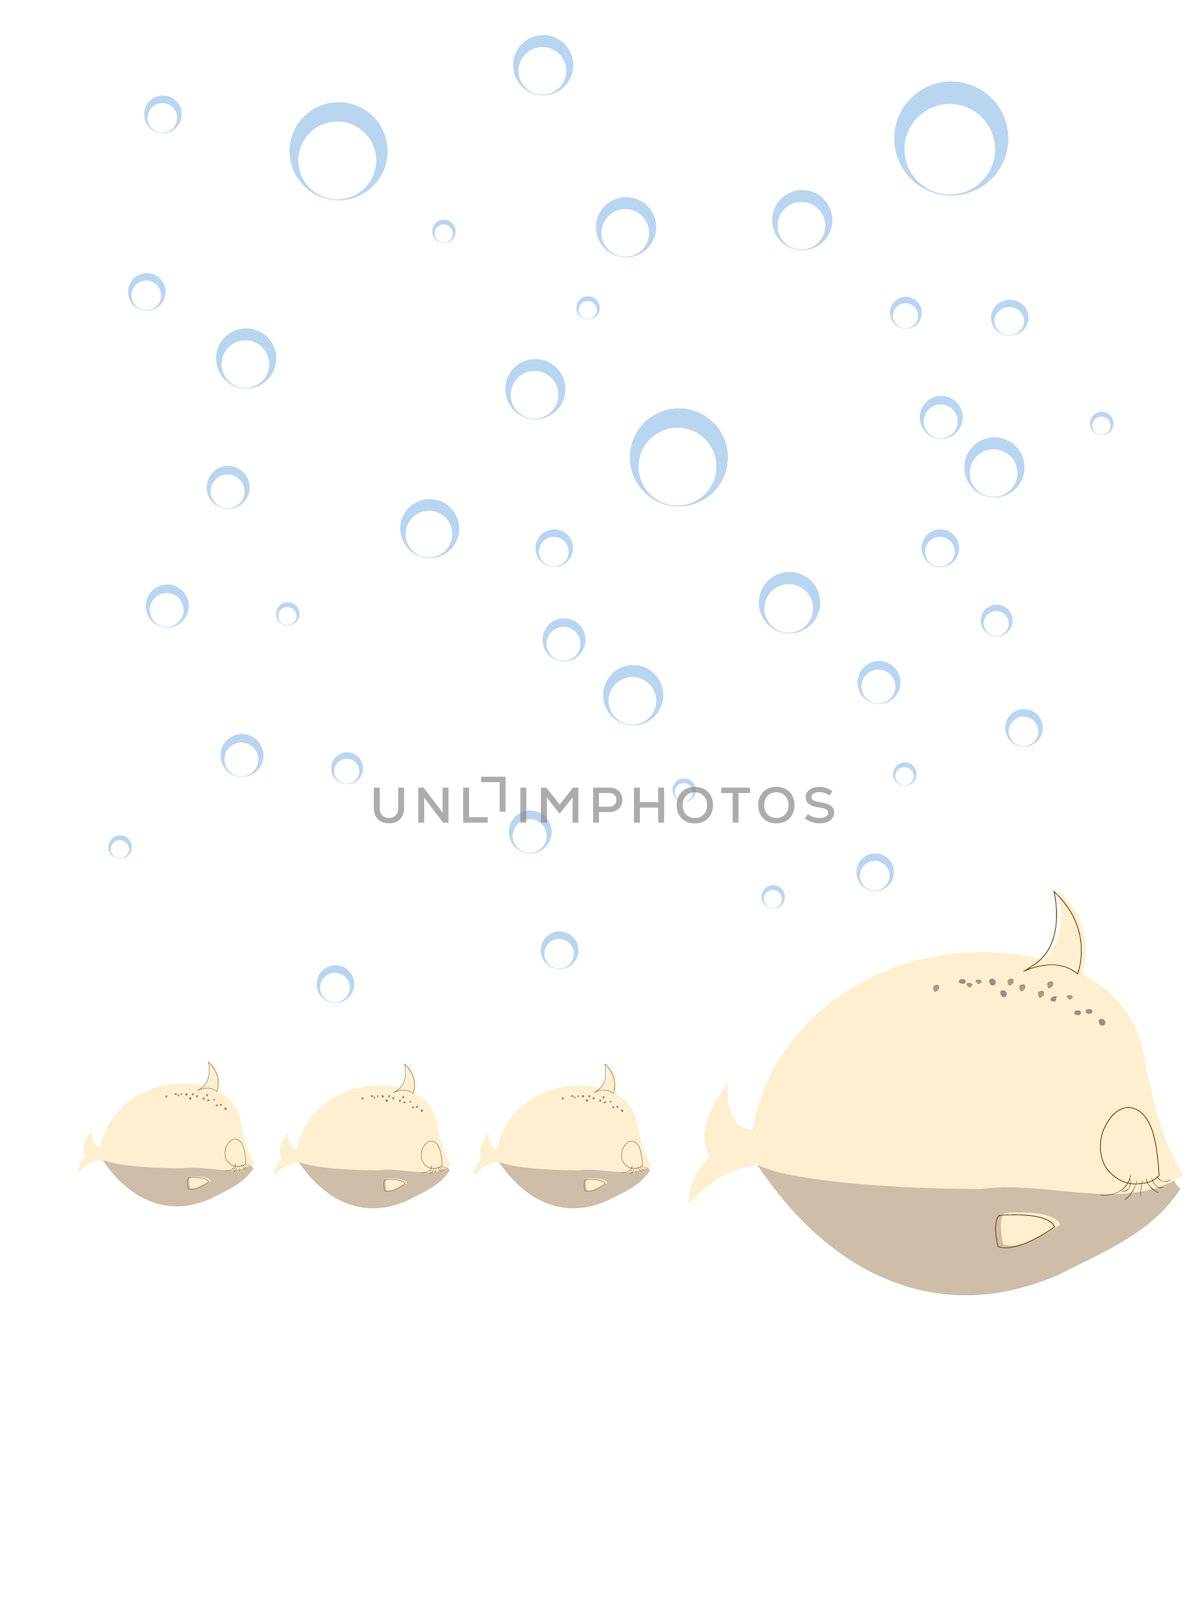 Family of fish, ideal design concept for print, isolated objects over white background